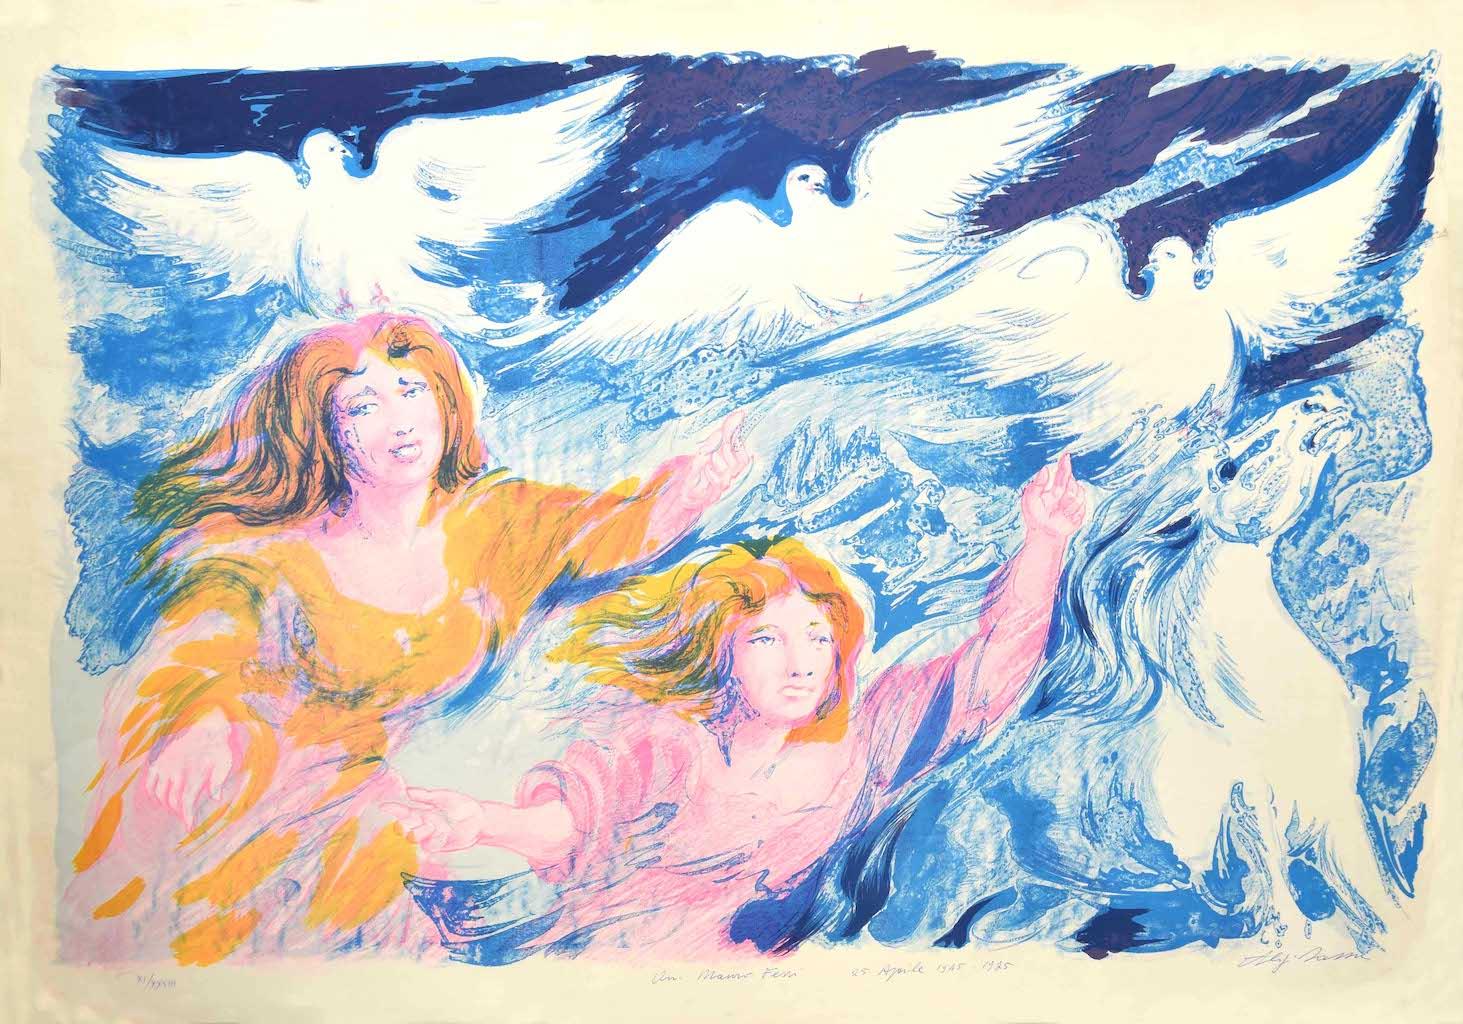 Sirens is an original lithograph, realized by Aligi Sassu in 1975,

Hand-signed on the lower right.

The state of preservation of the artwork is good except for a rip on the right margin..Sheet dimension: 65 x 92

The artwork represents  scenery